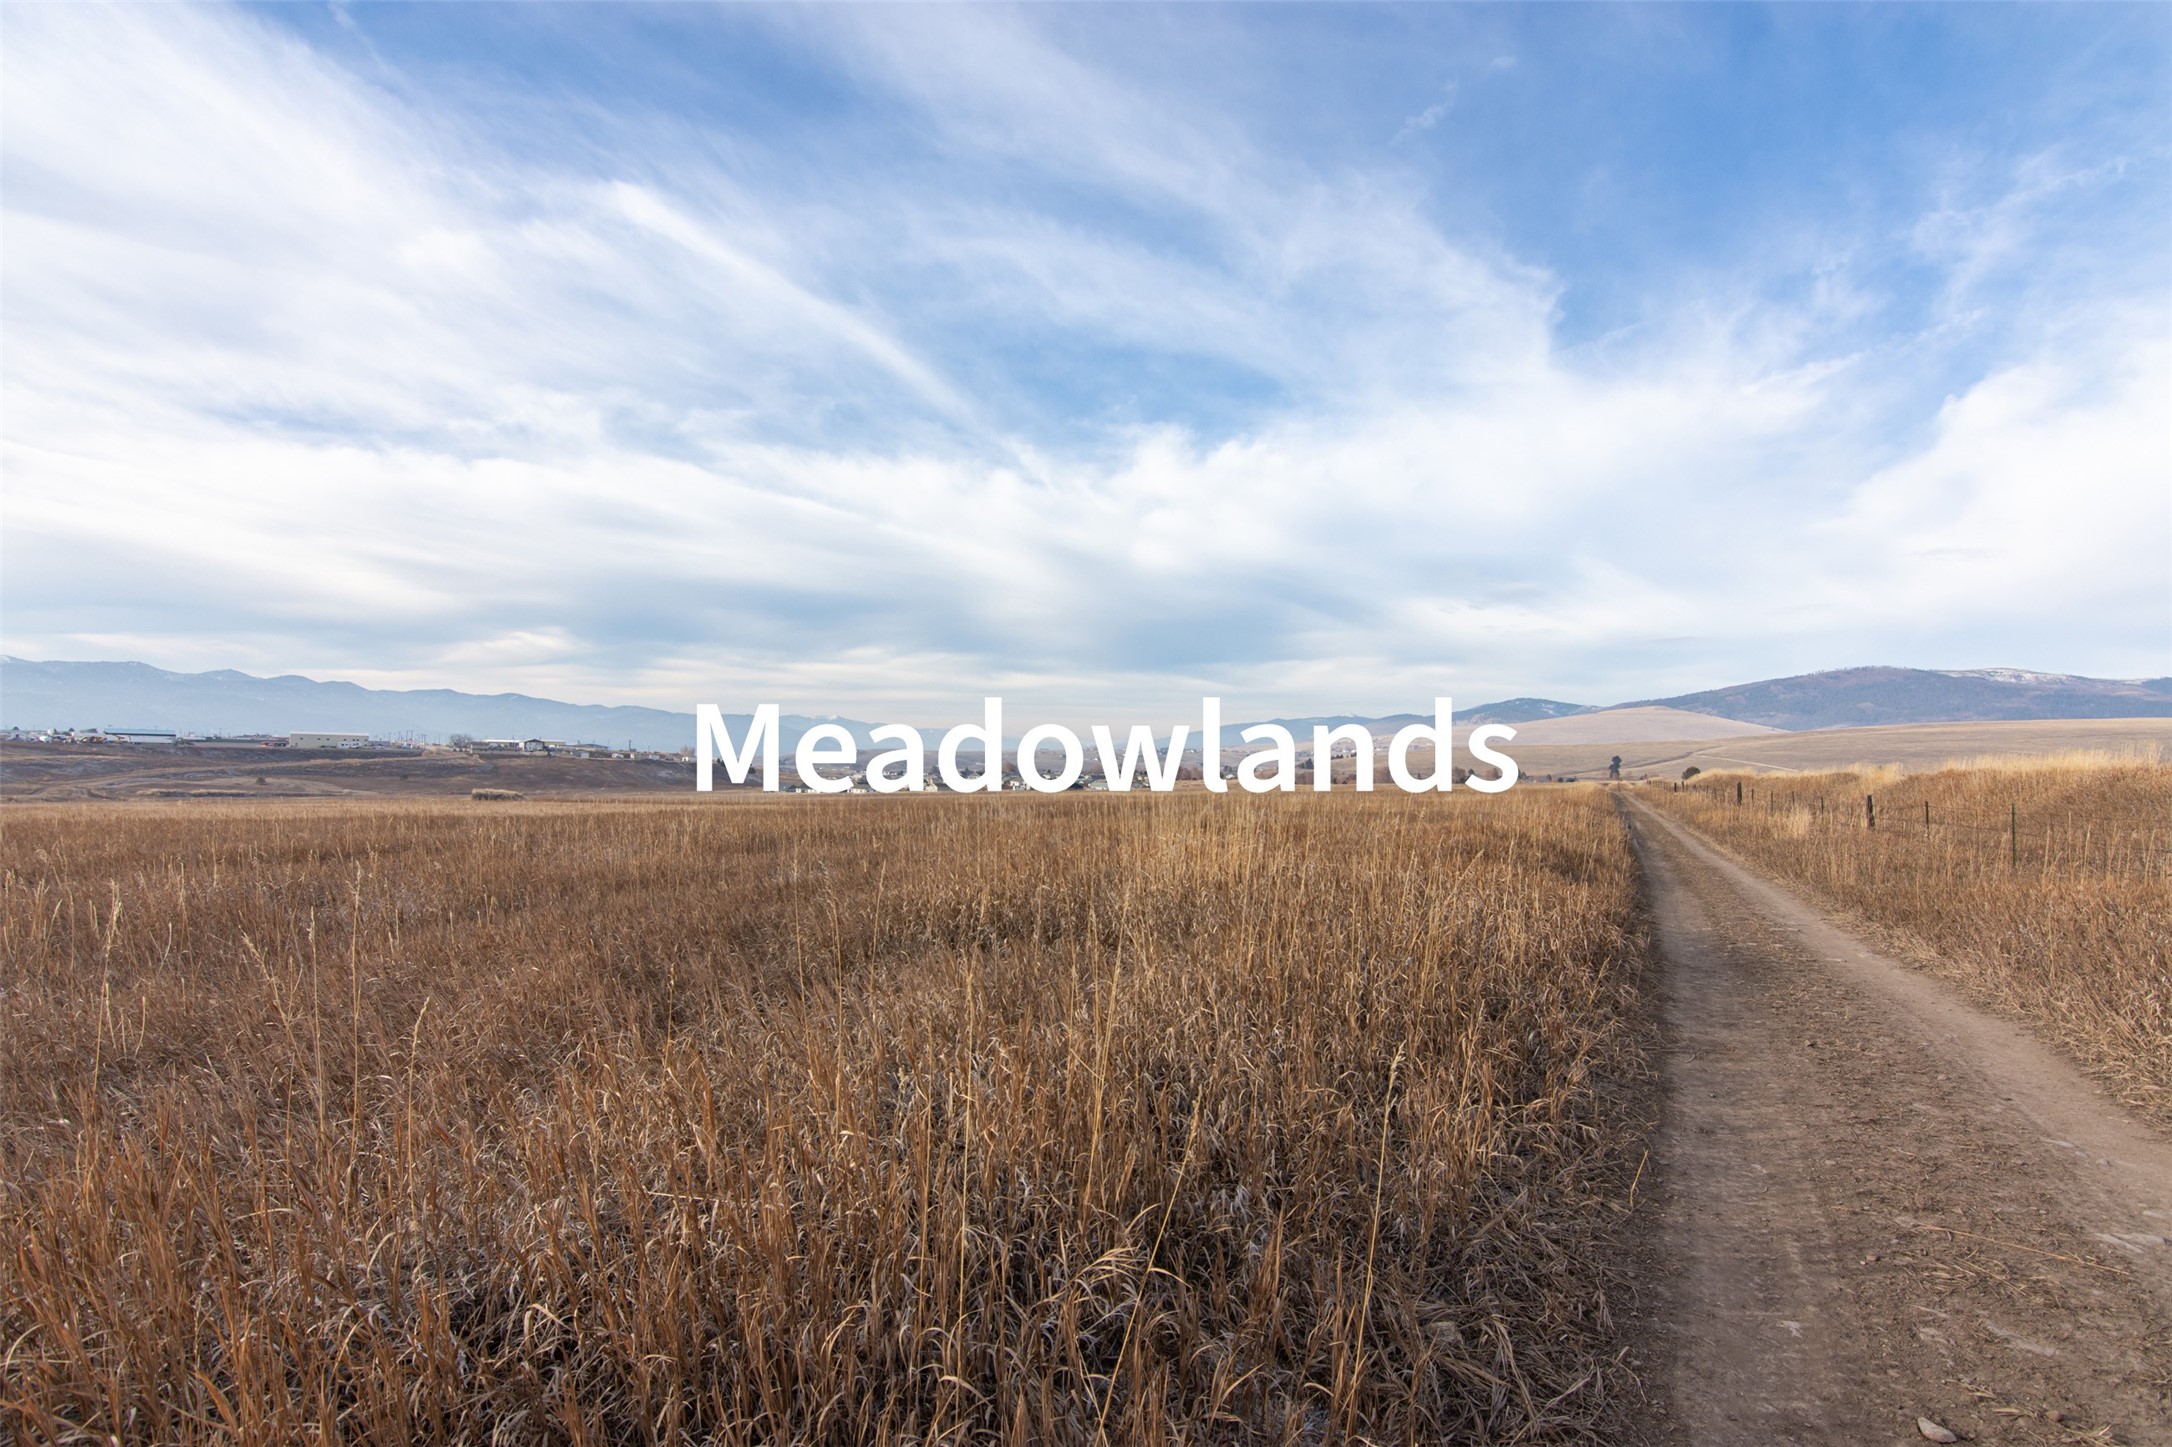 Welcome to "The Meadowlands," a 106-acre parcel of beautiful, open meadowland located in the Wye area on the outskirts of Missoula, Montana. This development is a blank canvas for creating a new community that can serve the missing middle housing needs of the city.

The land is conveniently located with easy access to both downtown Missoula and the airport, making it a prime location for residents who want to stay connected to the city while enjoying the tranquility of living in a community that's surrounded by nature.

The developers of "The Meadowlands" have envisioned a community that can provide a mix of detached single-family homes, stacked fourplexes, duplexes, and condominiums, which will offer a wide range of housing options that meet the needs of different residents. In addition to housing, the land can be used for other purposes as well. For example, a central park will be established as a centerpiece for the development, which provides an excellent opportunity for residents to enjoy the great outdoors and participate in community events.

Beyond the park, the rest of the common area can be used for whatever the purchaser of the land deems to be the best use, whether that be creating additional recreational spaces, building more housing units, or developing other commercial properties.

With its beautiful meadows and prime location, "The Meadowlands" offers an excellent opportunity for creating a new community that can provide a high quality of life for its residents. At the end of the day, the purchaser of the land has the final say in what they choose to do with it, whether that be to develop a mixed-use community with a focus on commercial properties or to create a more residential-focused community with amenities that serve the needs of its residents.

"The Meadowlands" is more than just a development project; it's an opportunity to make a lasting impact on the Missoula community. By developing a mixed-use community, you'll provide a safe, beautiful, and engaging environment for residents to call home. This development has the potential to become a true gem of the Missoula region, attracting both residents and businesses alike. Call Jason Suchecki 406-241-5625 or your Real Estate Professional for more information.